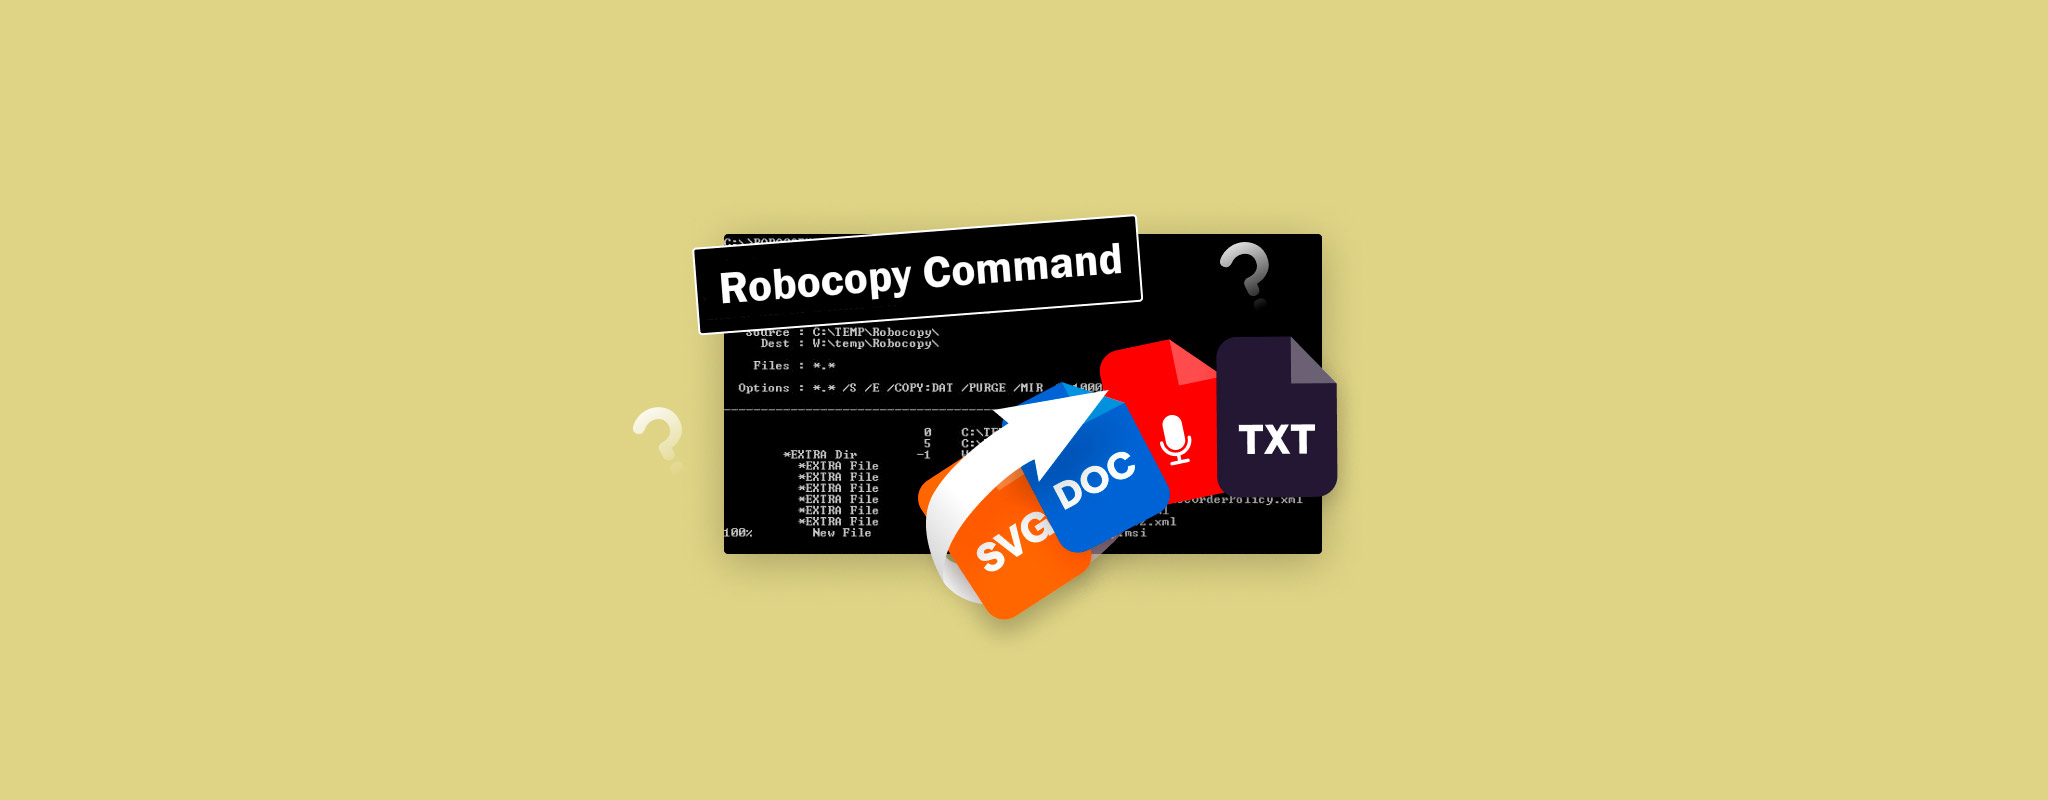 recover files deleted by robocopy /mir